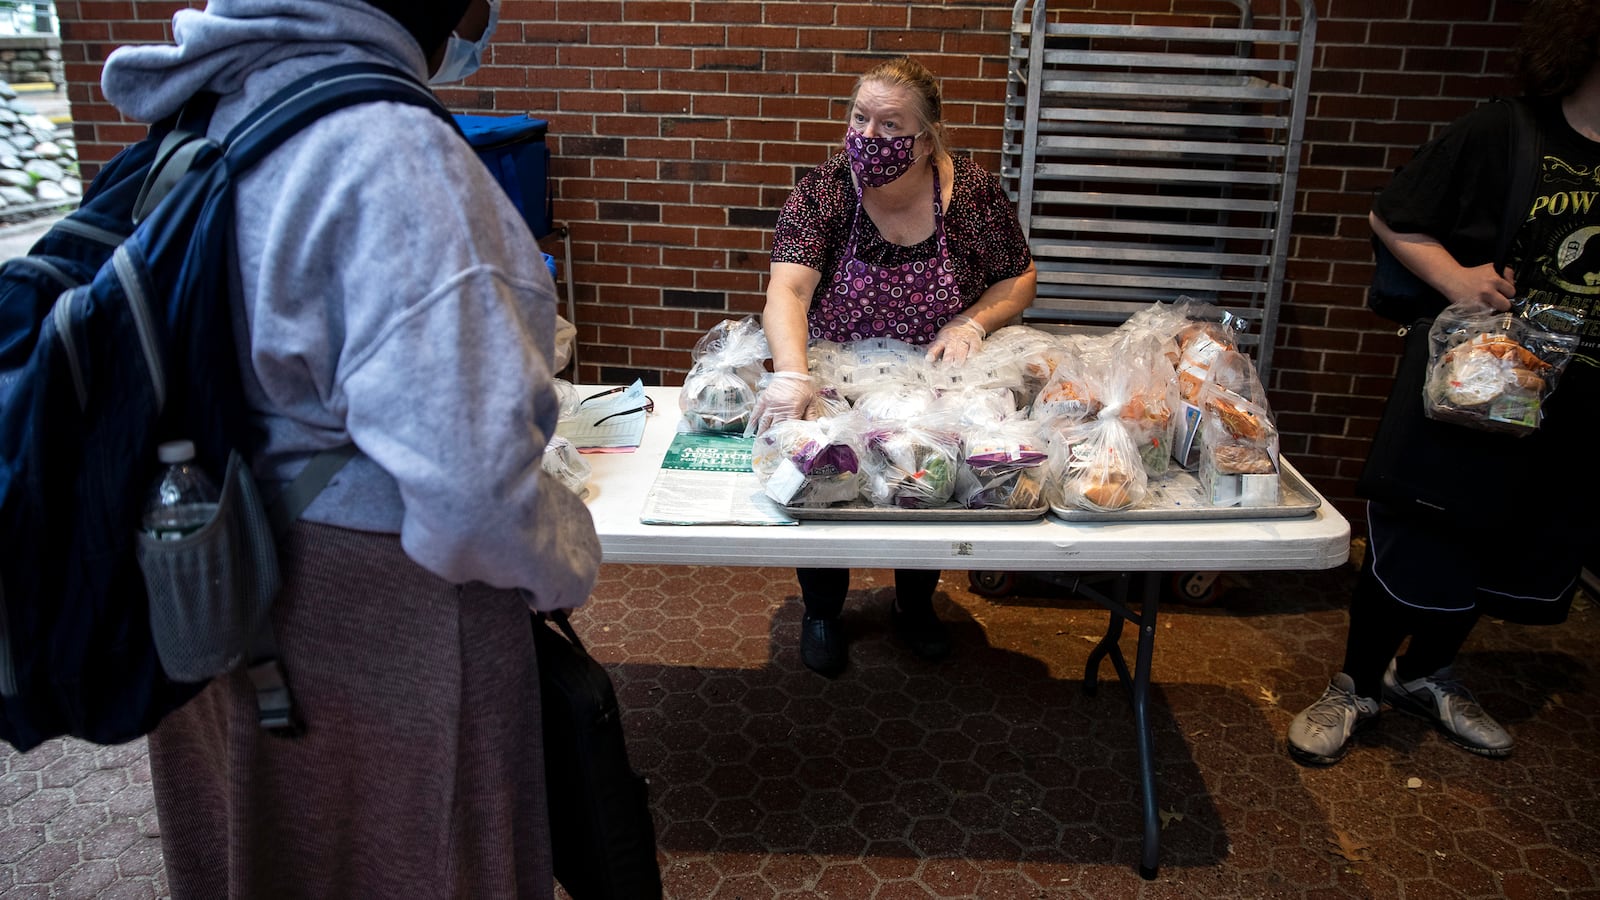 A woman wearing a mask hands food to a high school student wearing a hijab.